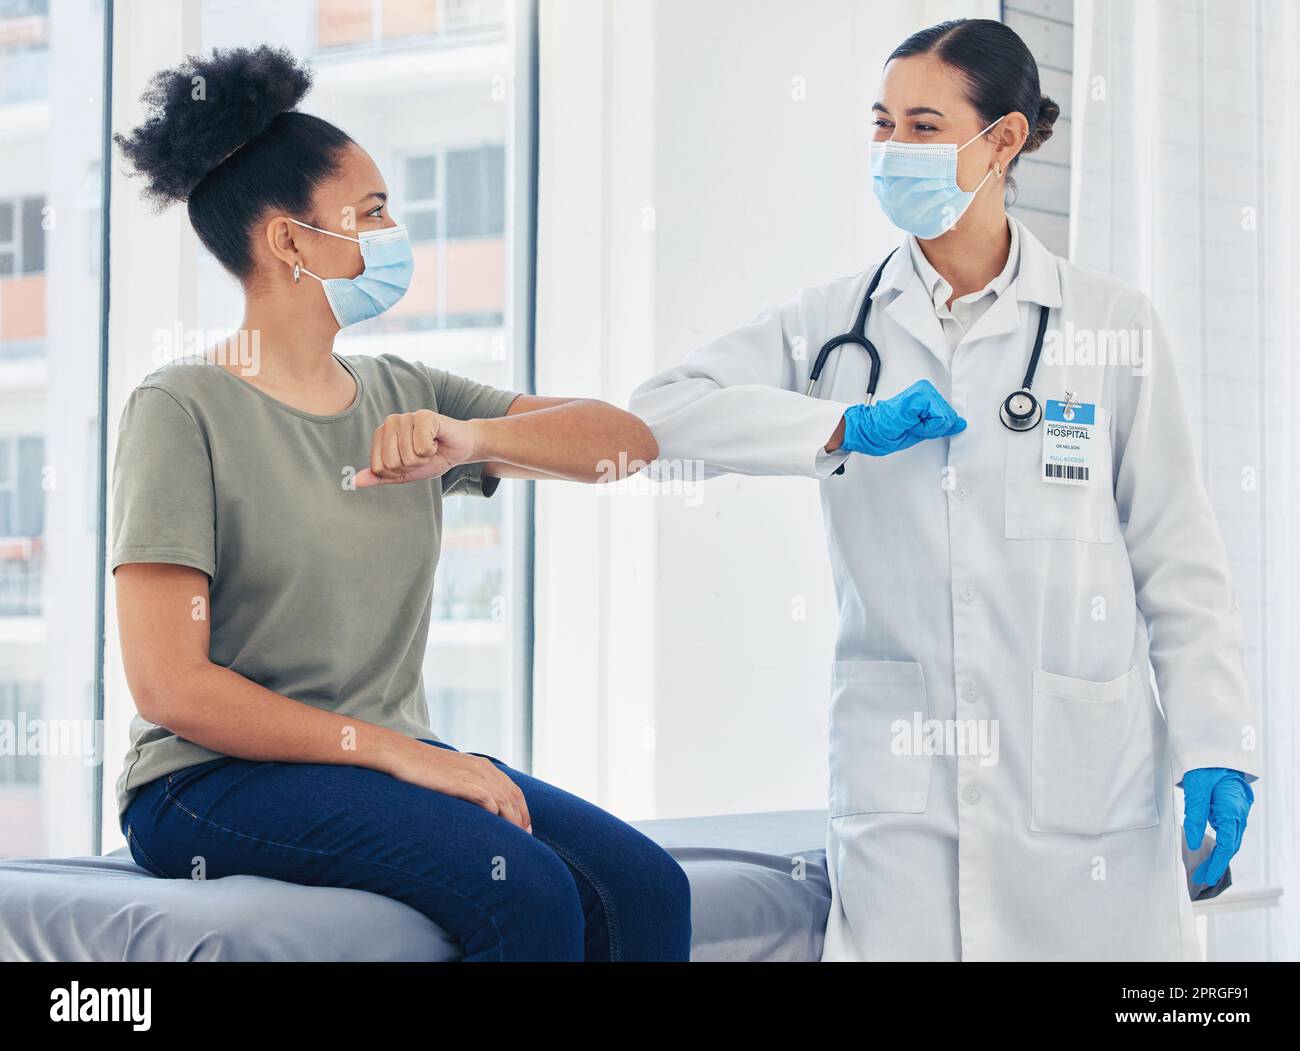 Doctor, covid and greeting medical healthcare expert with patient in safe elbow with masks in a hospital. Happy women following safety social distance rules to prevent the spread of virus at clinic Stock Photo